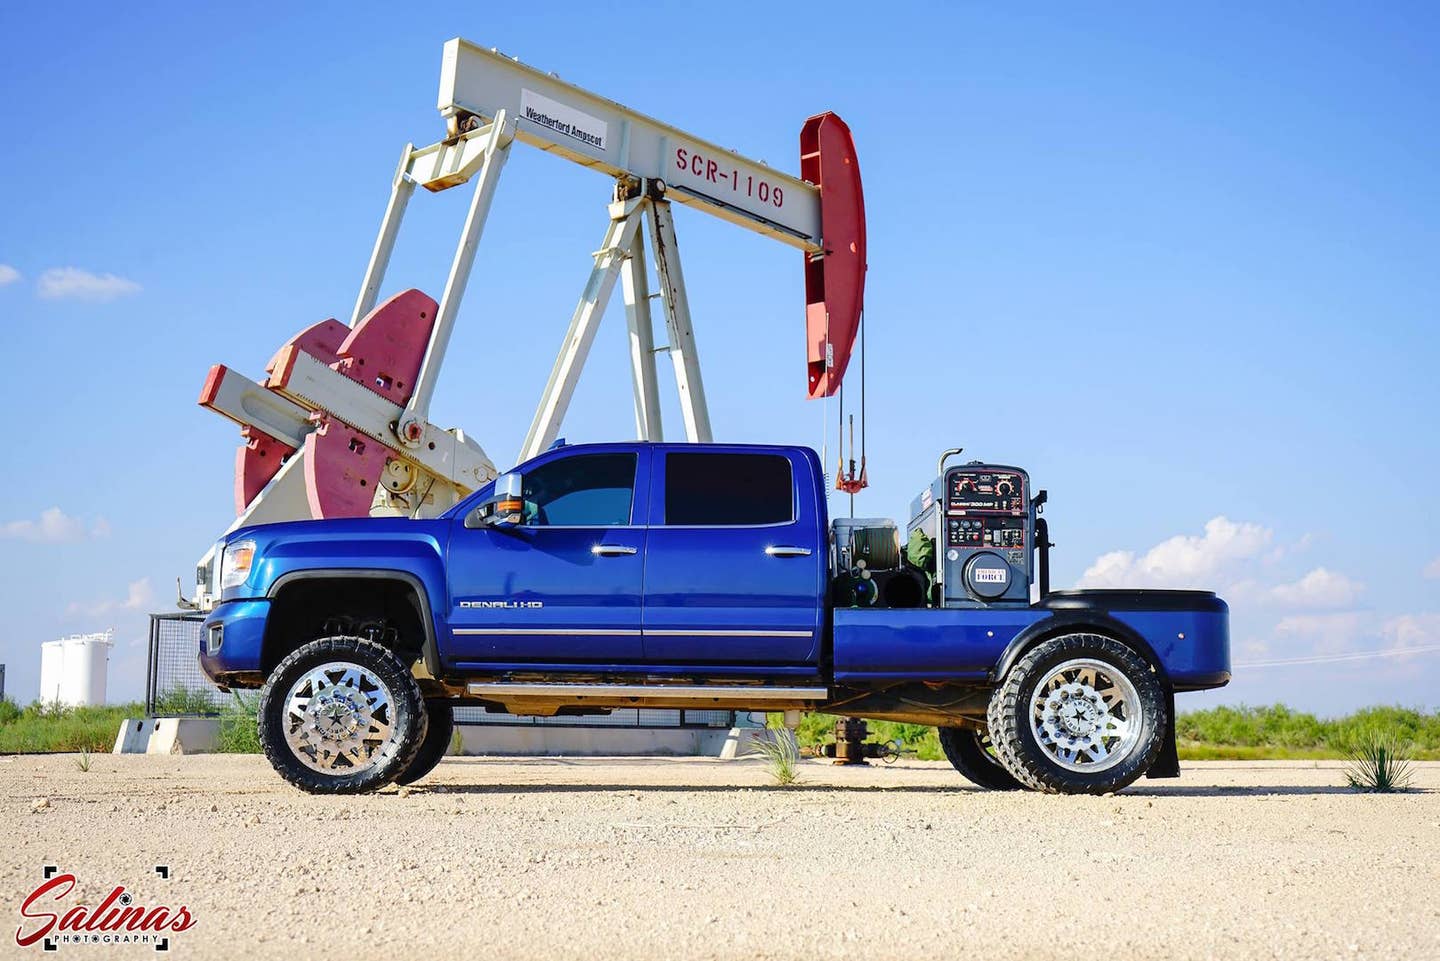 Pipeliners Are Customizing Their Welding Rigs